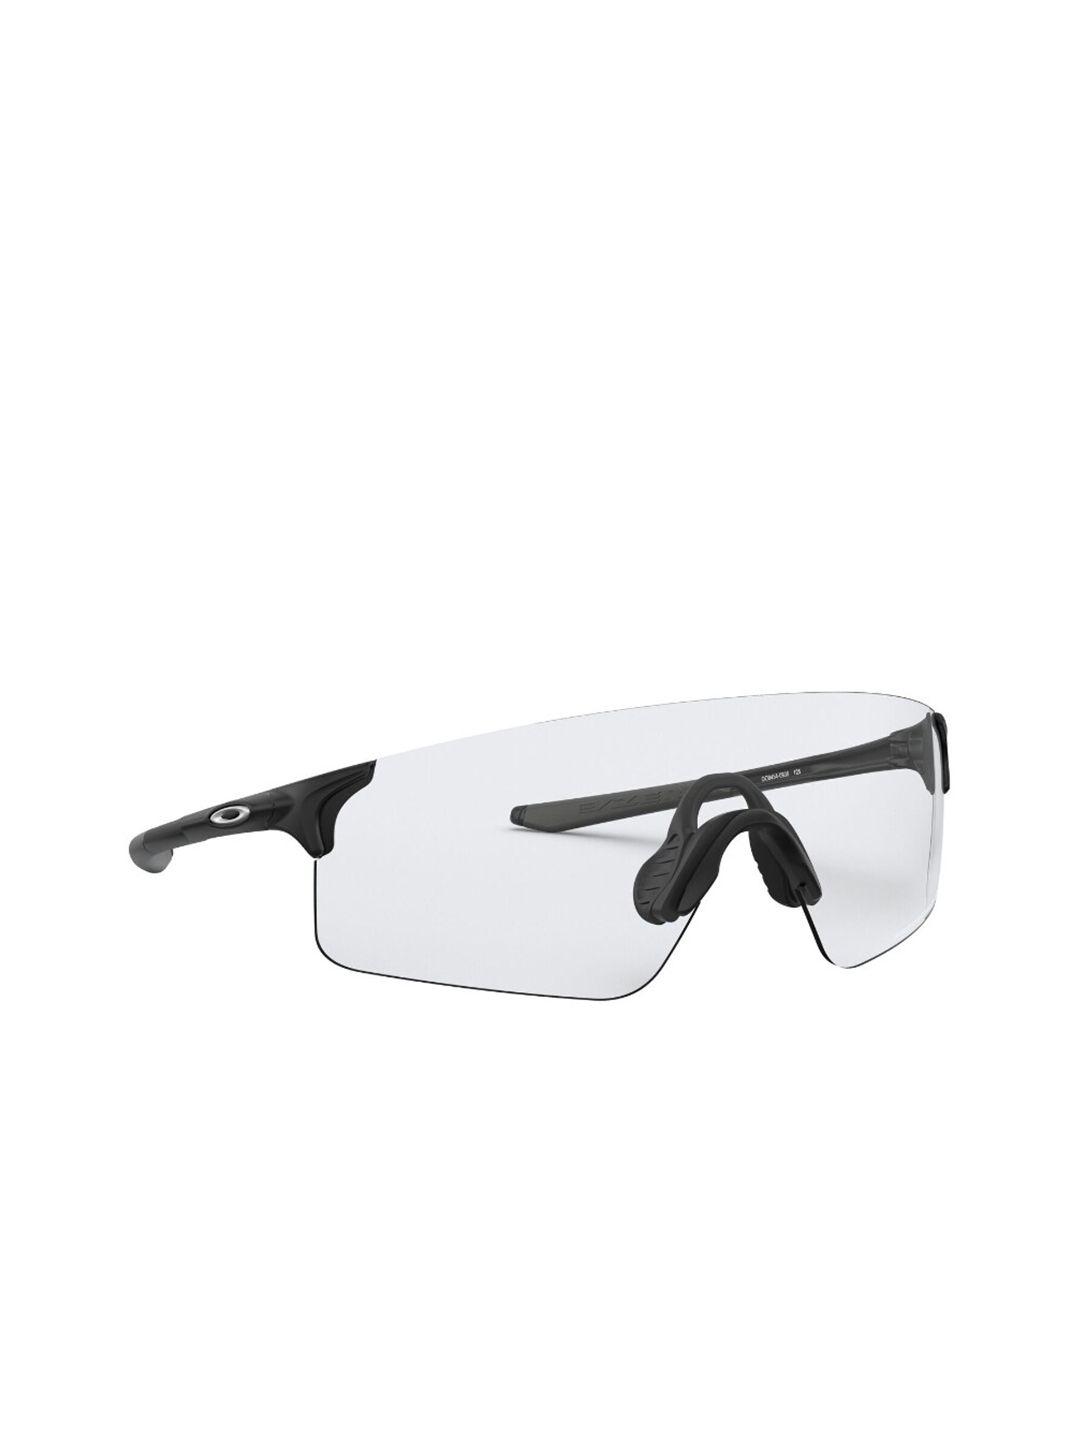 oakley-men-shield-sunglasses-with-uv-protected-lens-888392486646